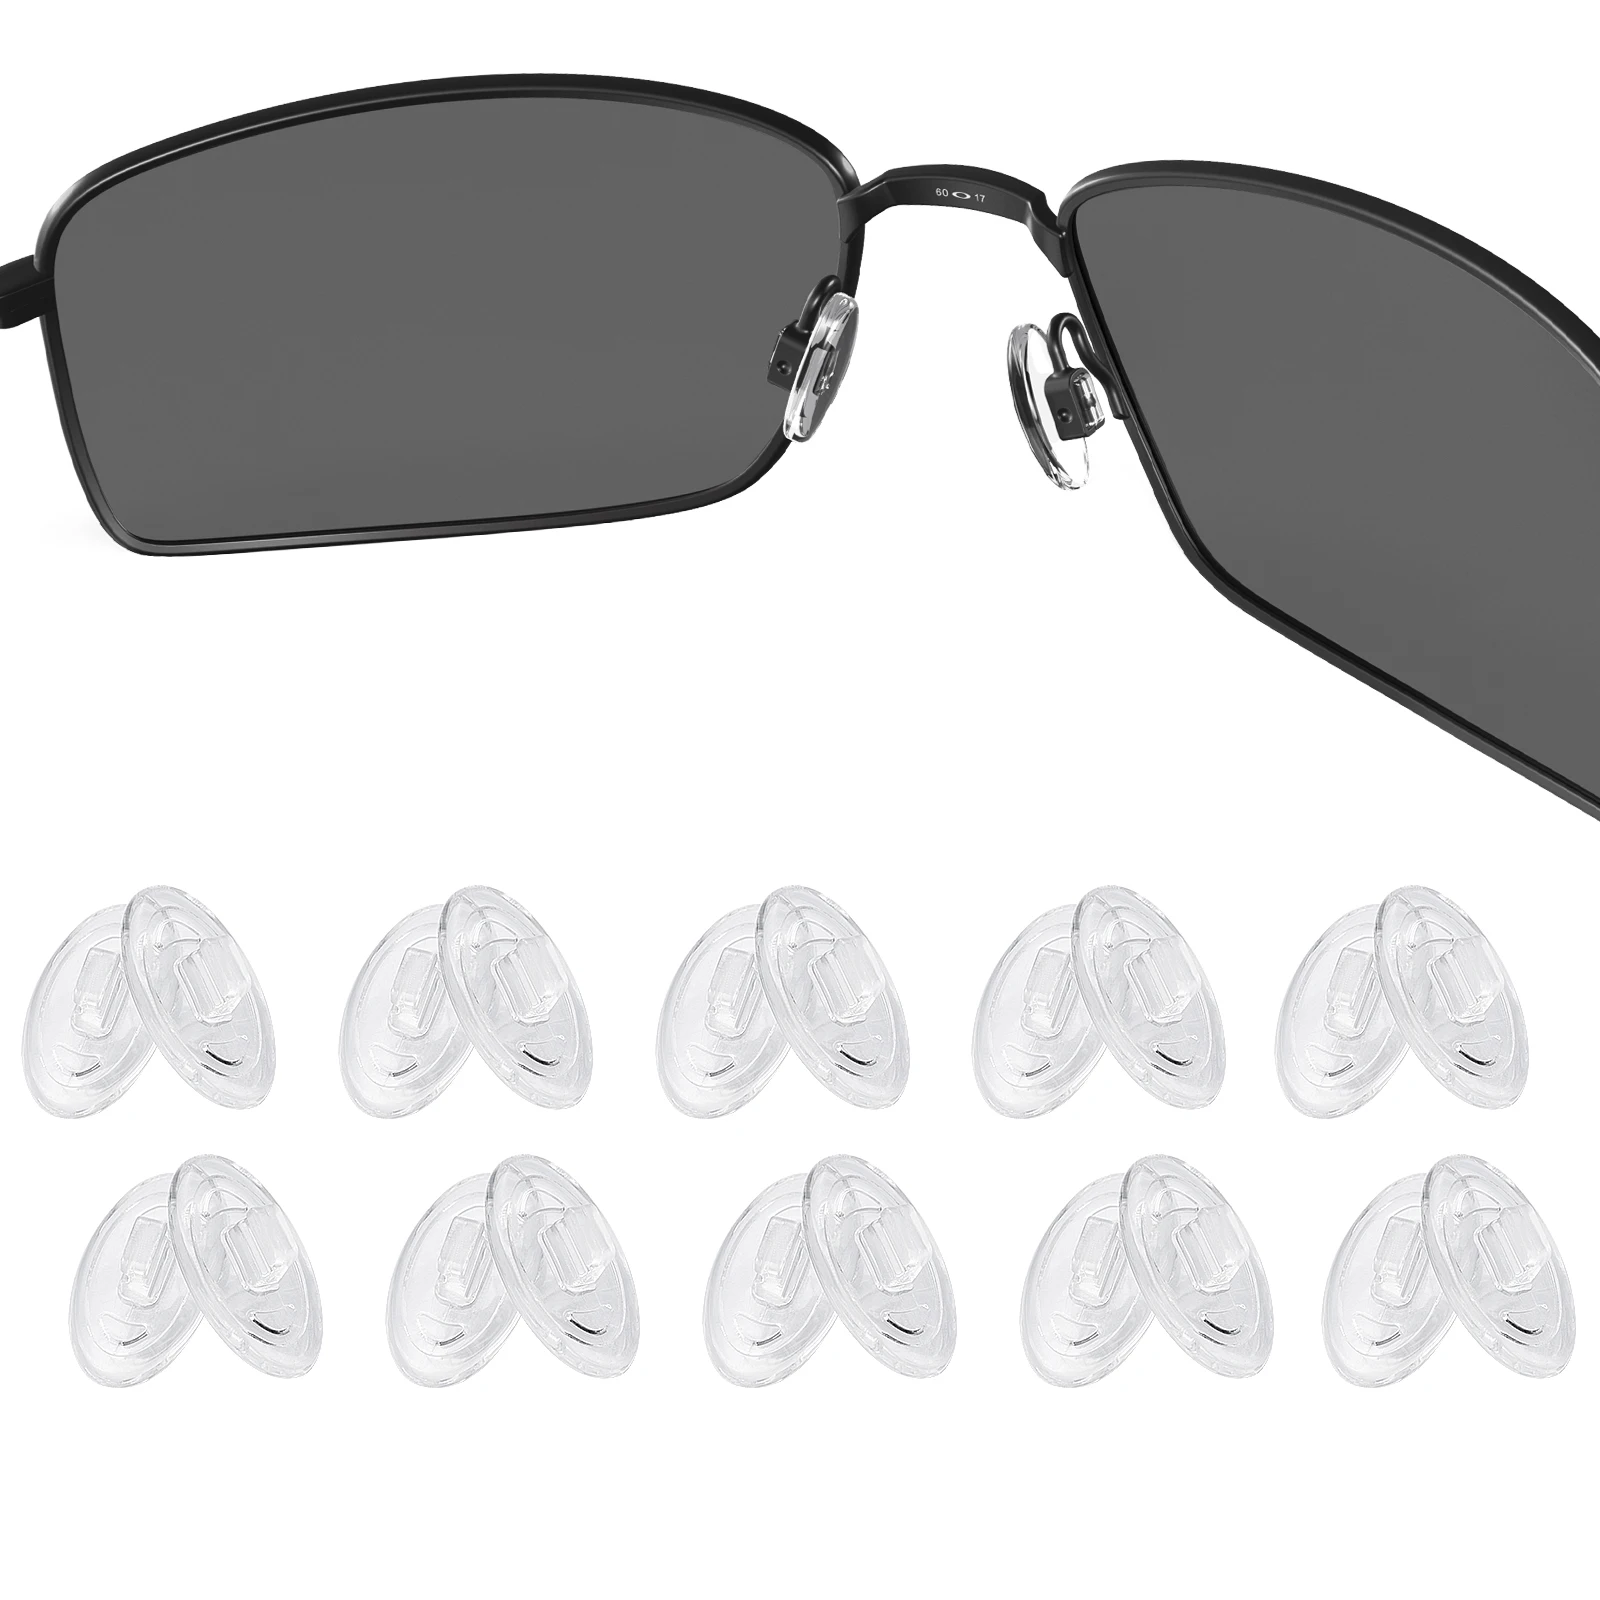 

E.O.S Silicon Rubber Replacement Clear Nose Pads for Spy Optic Pemberton Whistler Cliffside Westport Frame Multi-Options